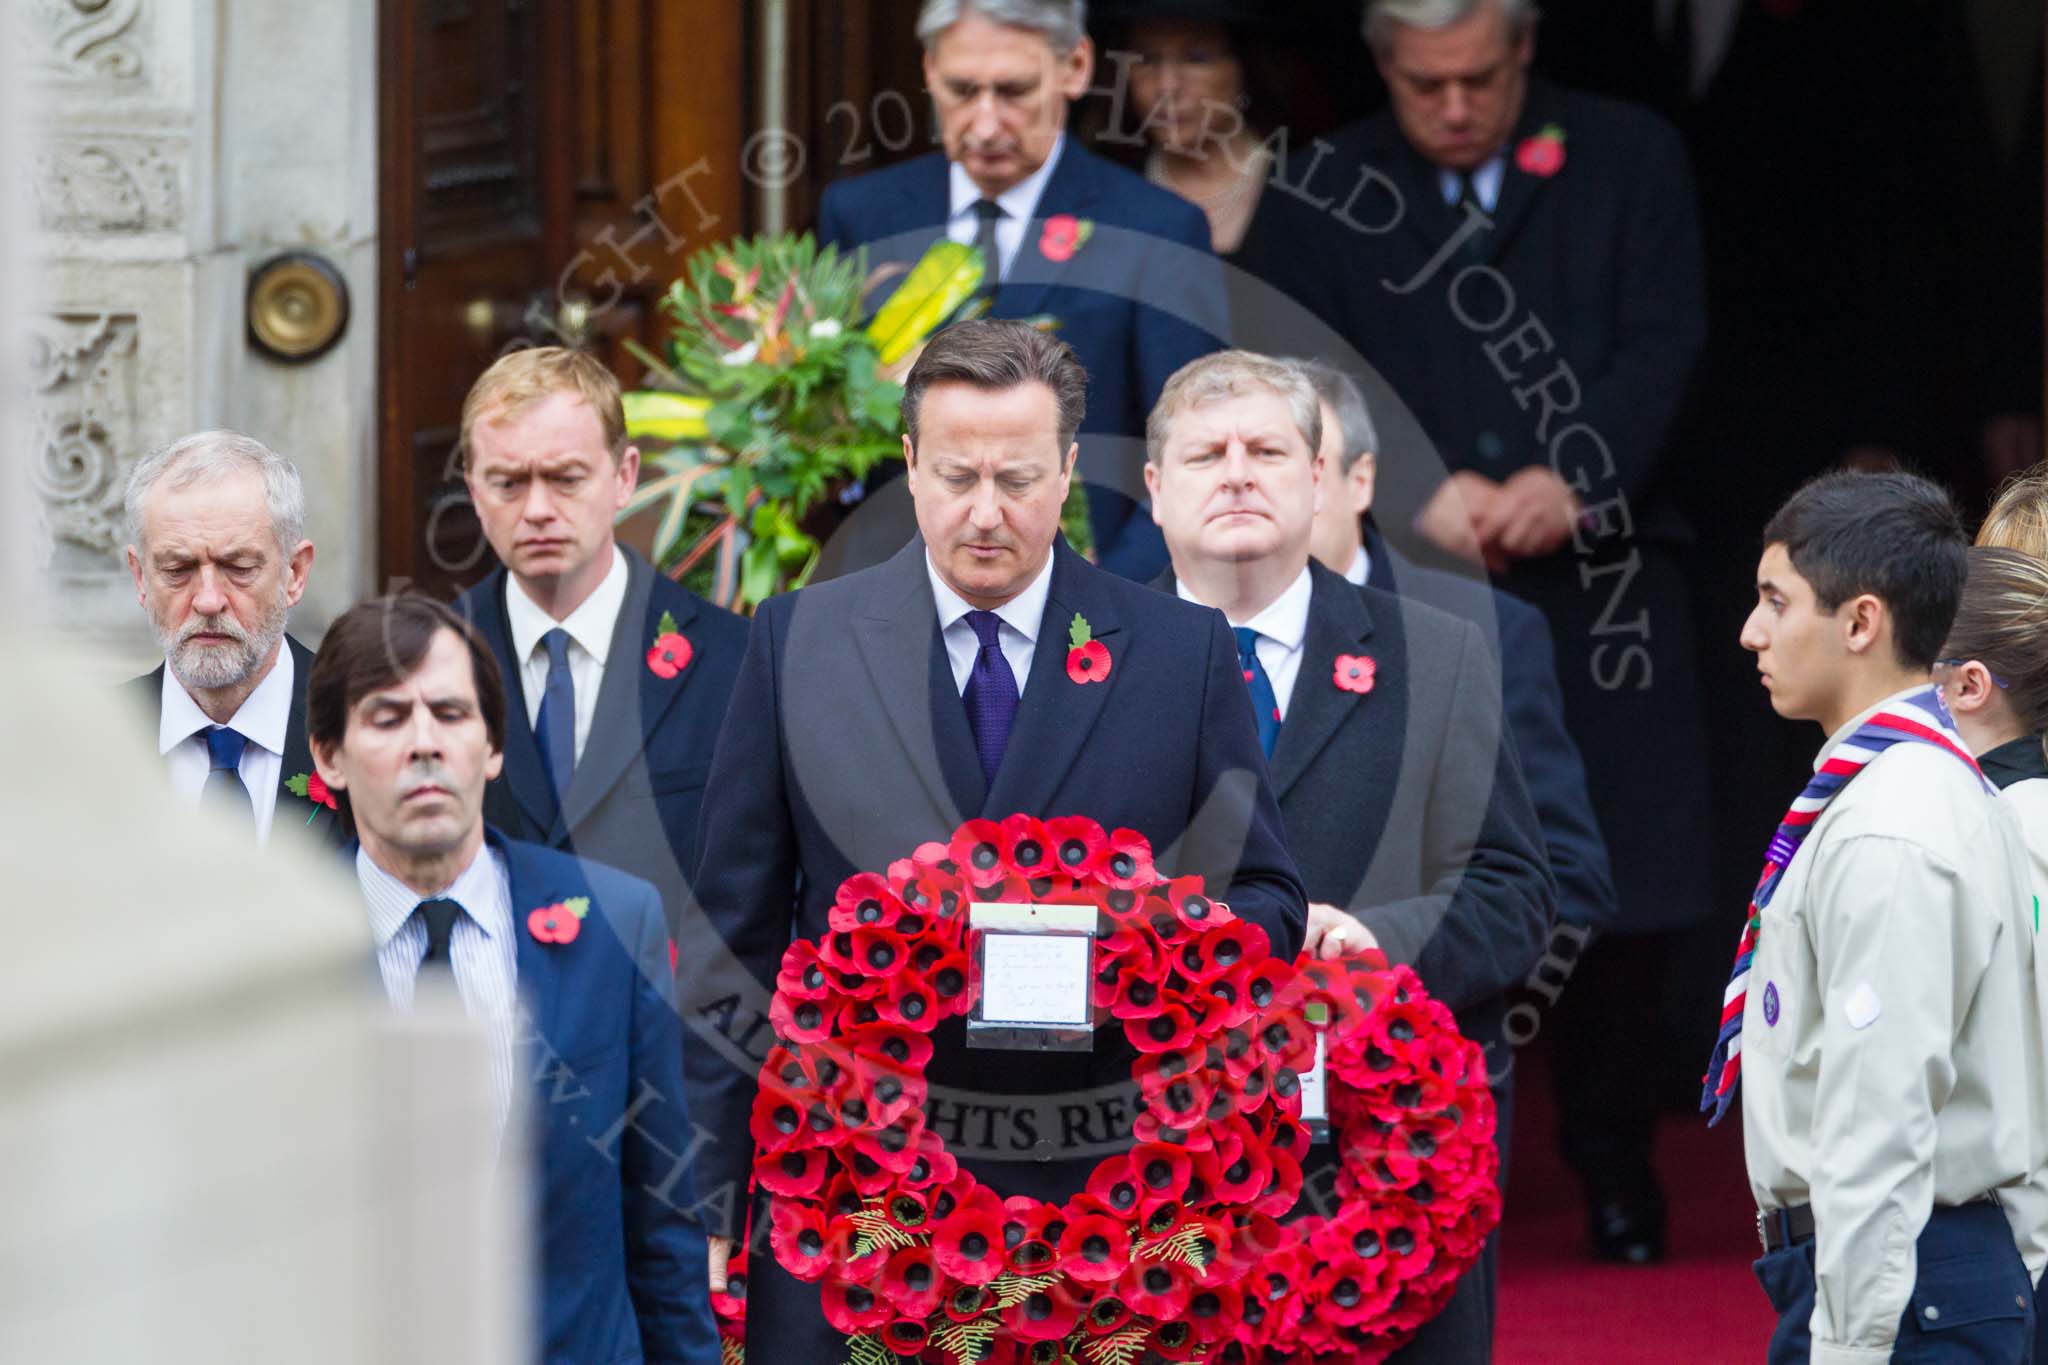 Remembrance Sunday at the Cenotaph 2015: The politicians leaving the Foreign- and Commonwealth Office, led by David Cameron, the Prime Minister, and Jeremy Corbyn as leader of the opposition. Image #87, 08 November 2015 10:55 Whitehall, London, UK